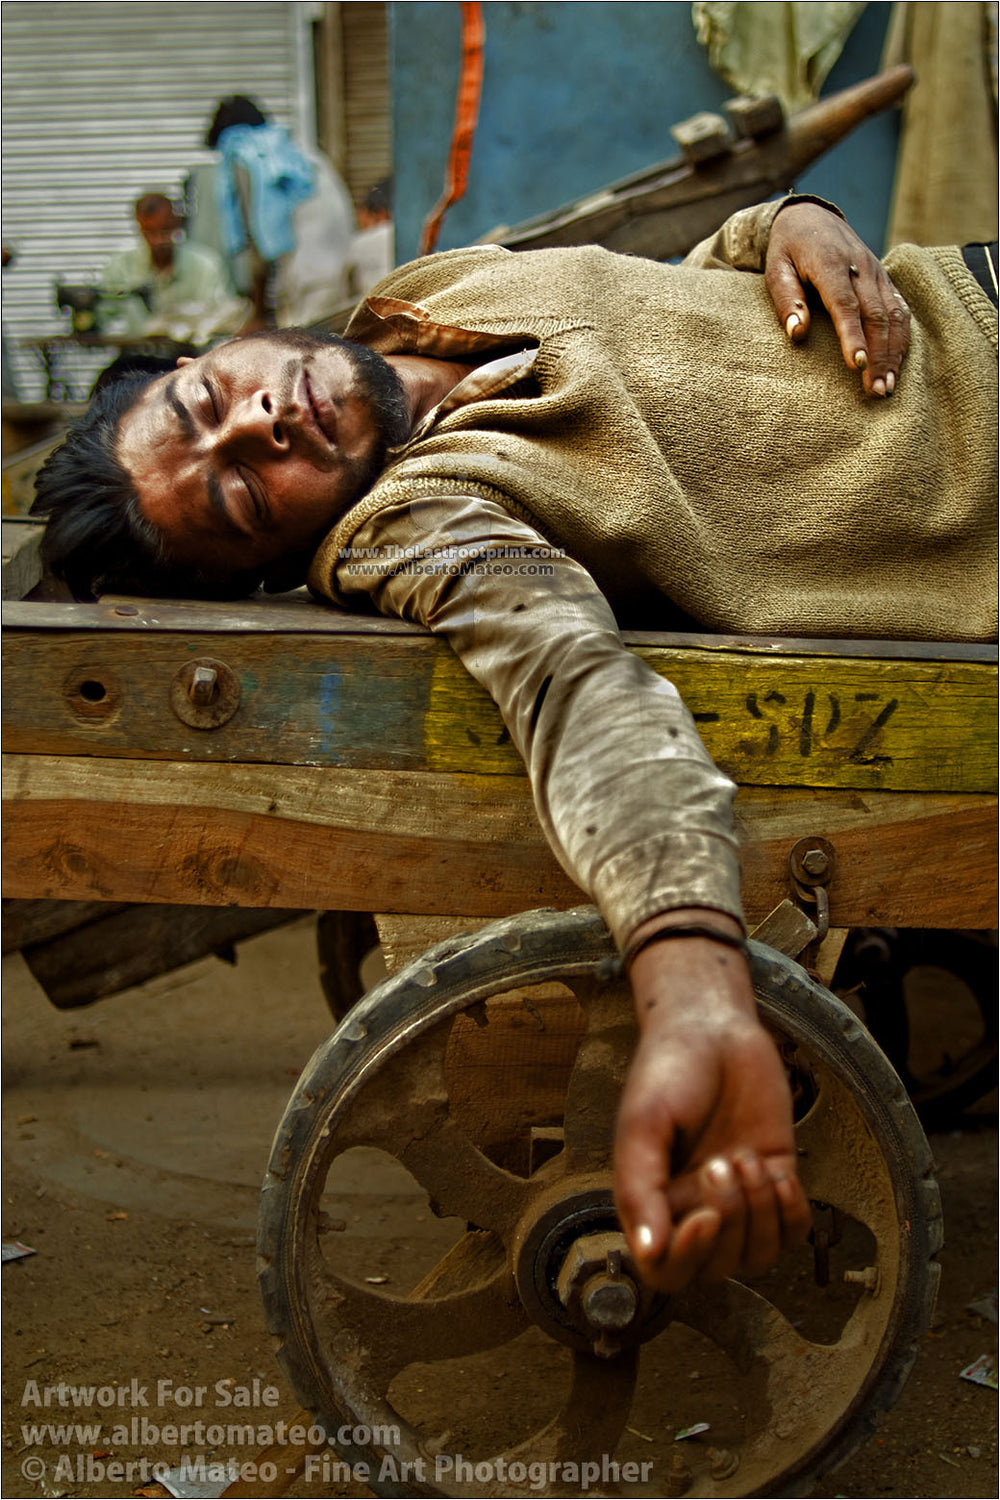 Carrier taking a nap on delivery charriot, Old Delhi. | By Alberto Mateo.